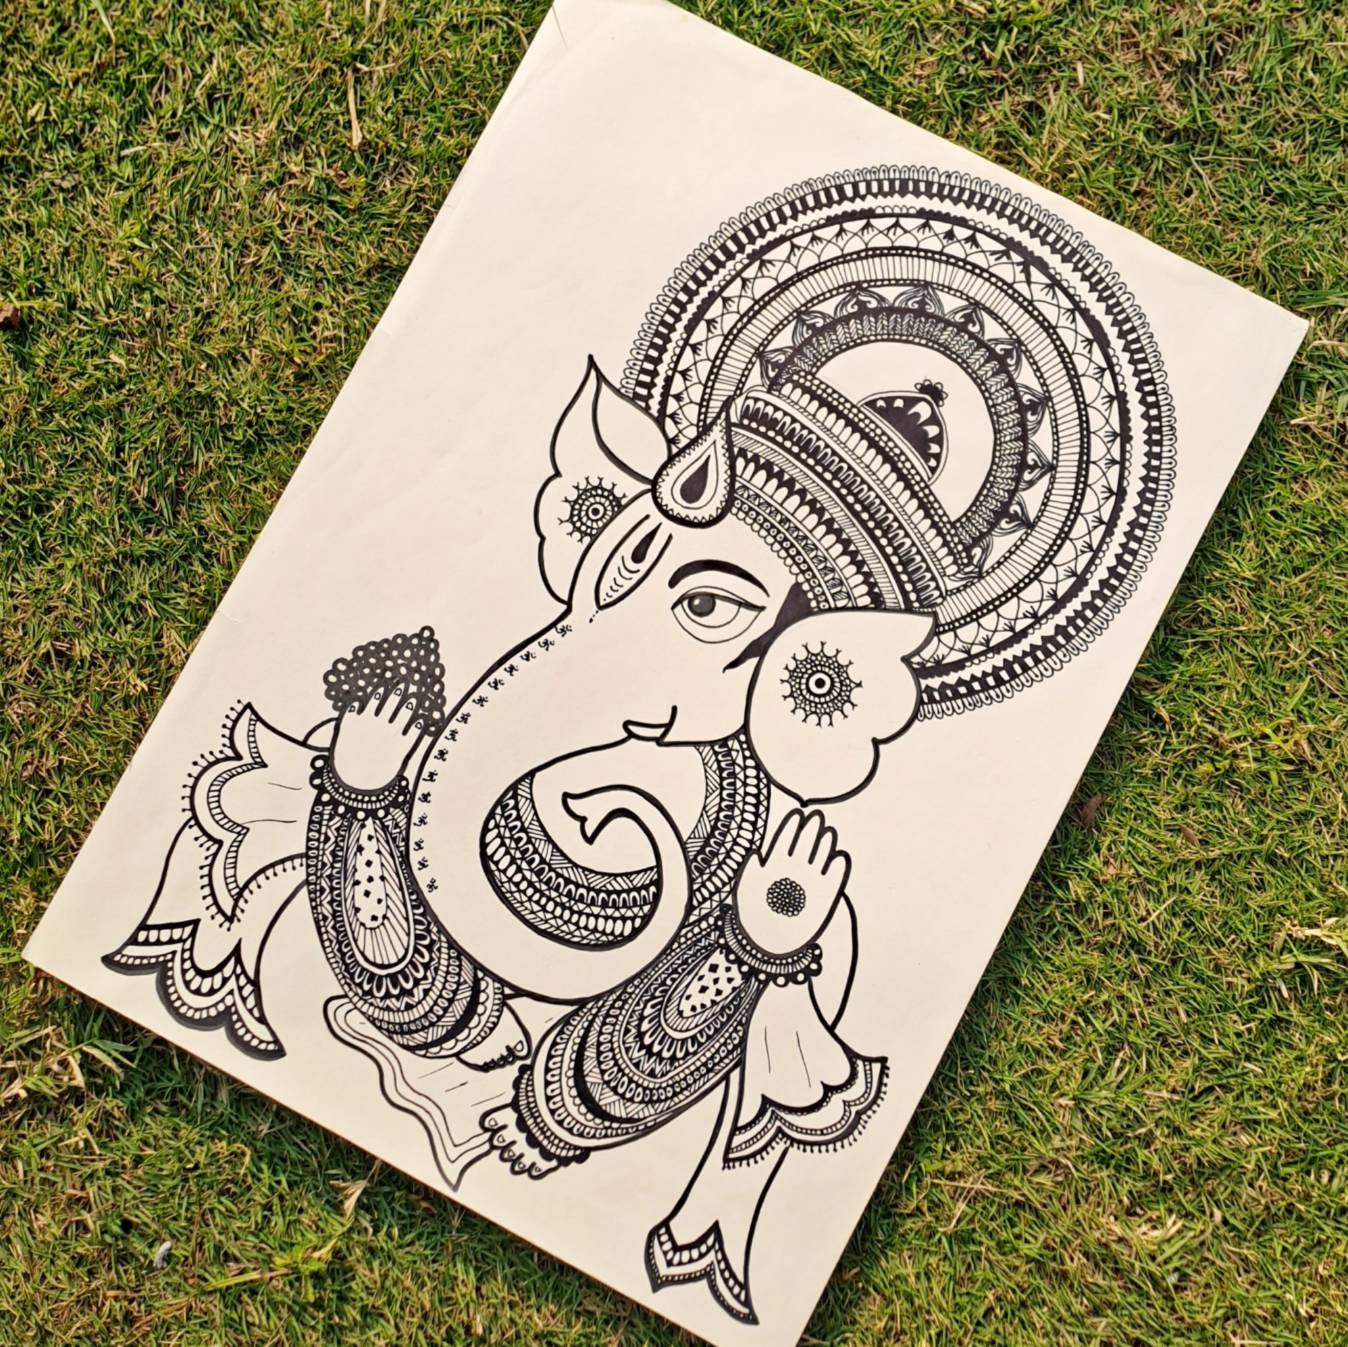 Tree Ganesha Art fighters Drawing contest 2020